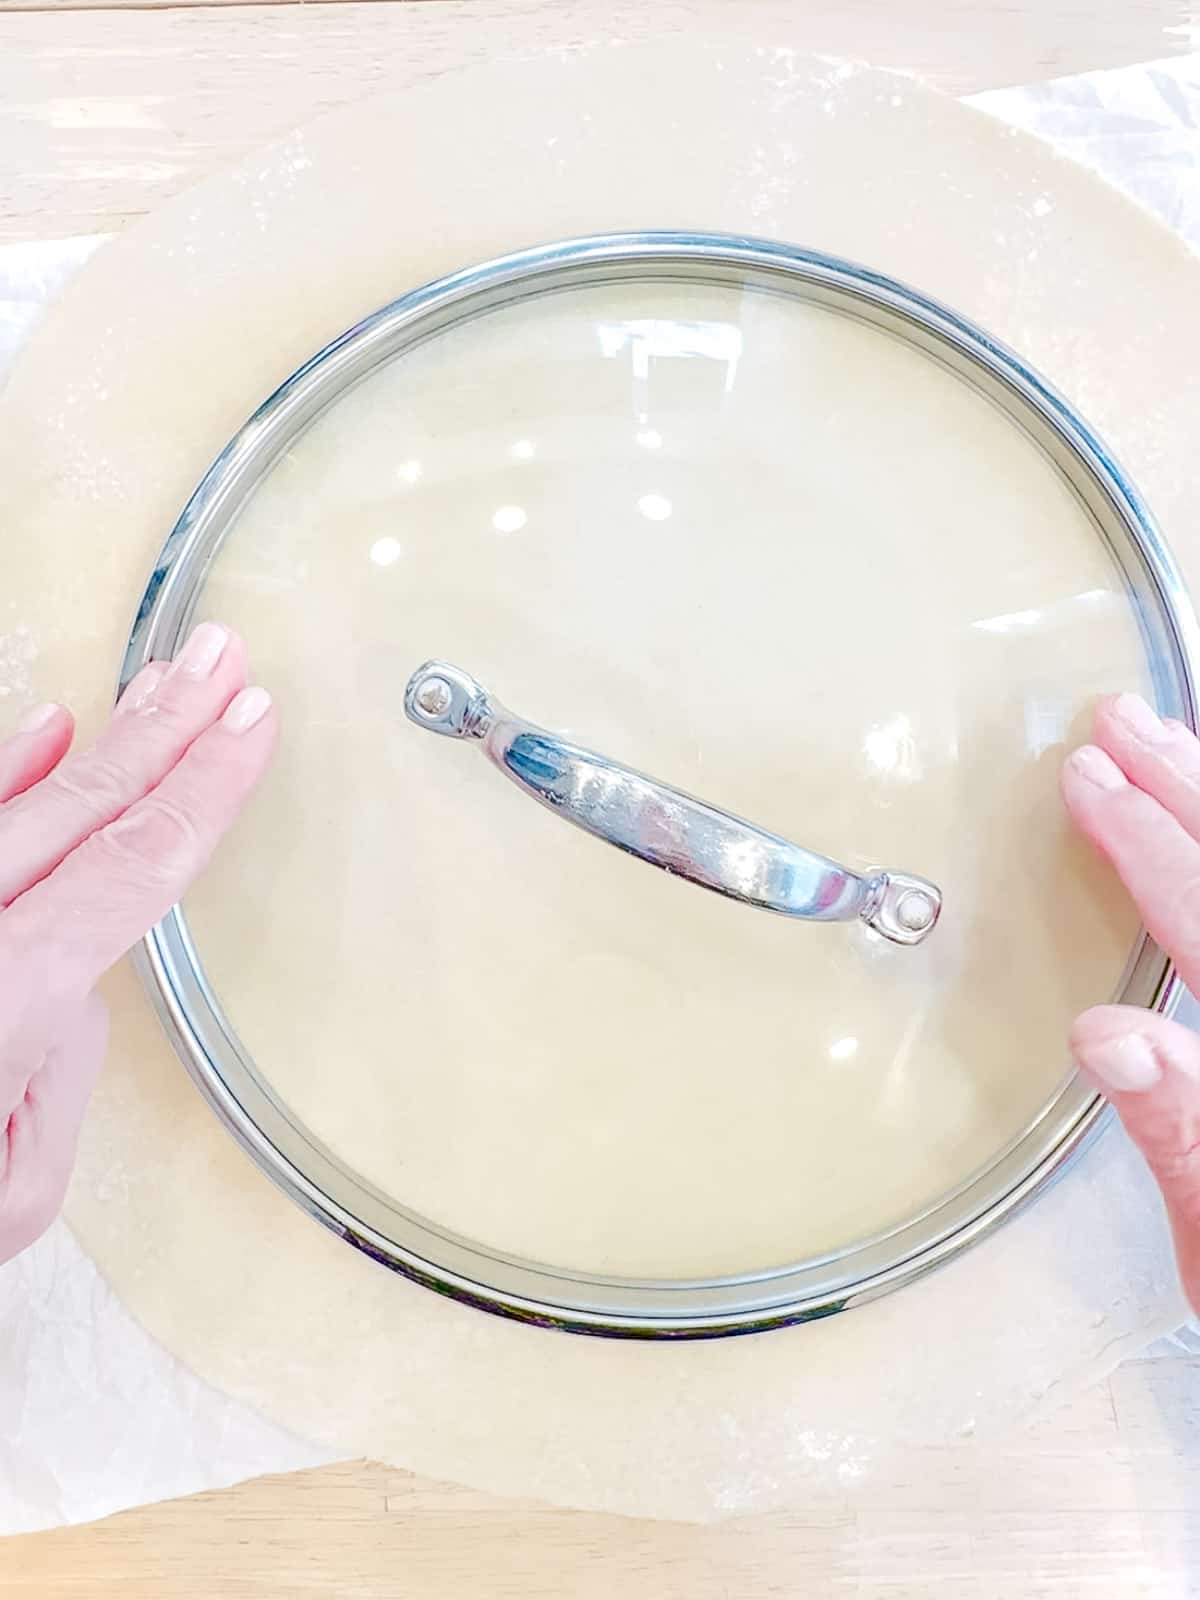 Using a pot lid to mark a circle for a fillings border on galette crust.